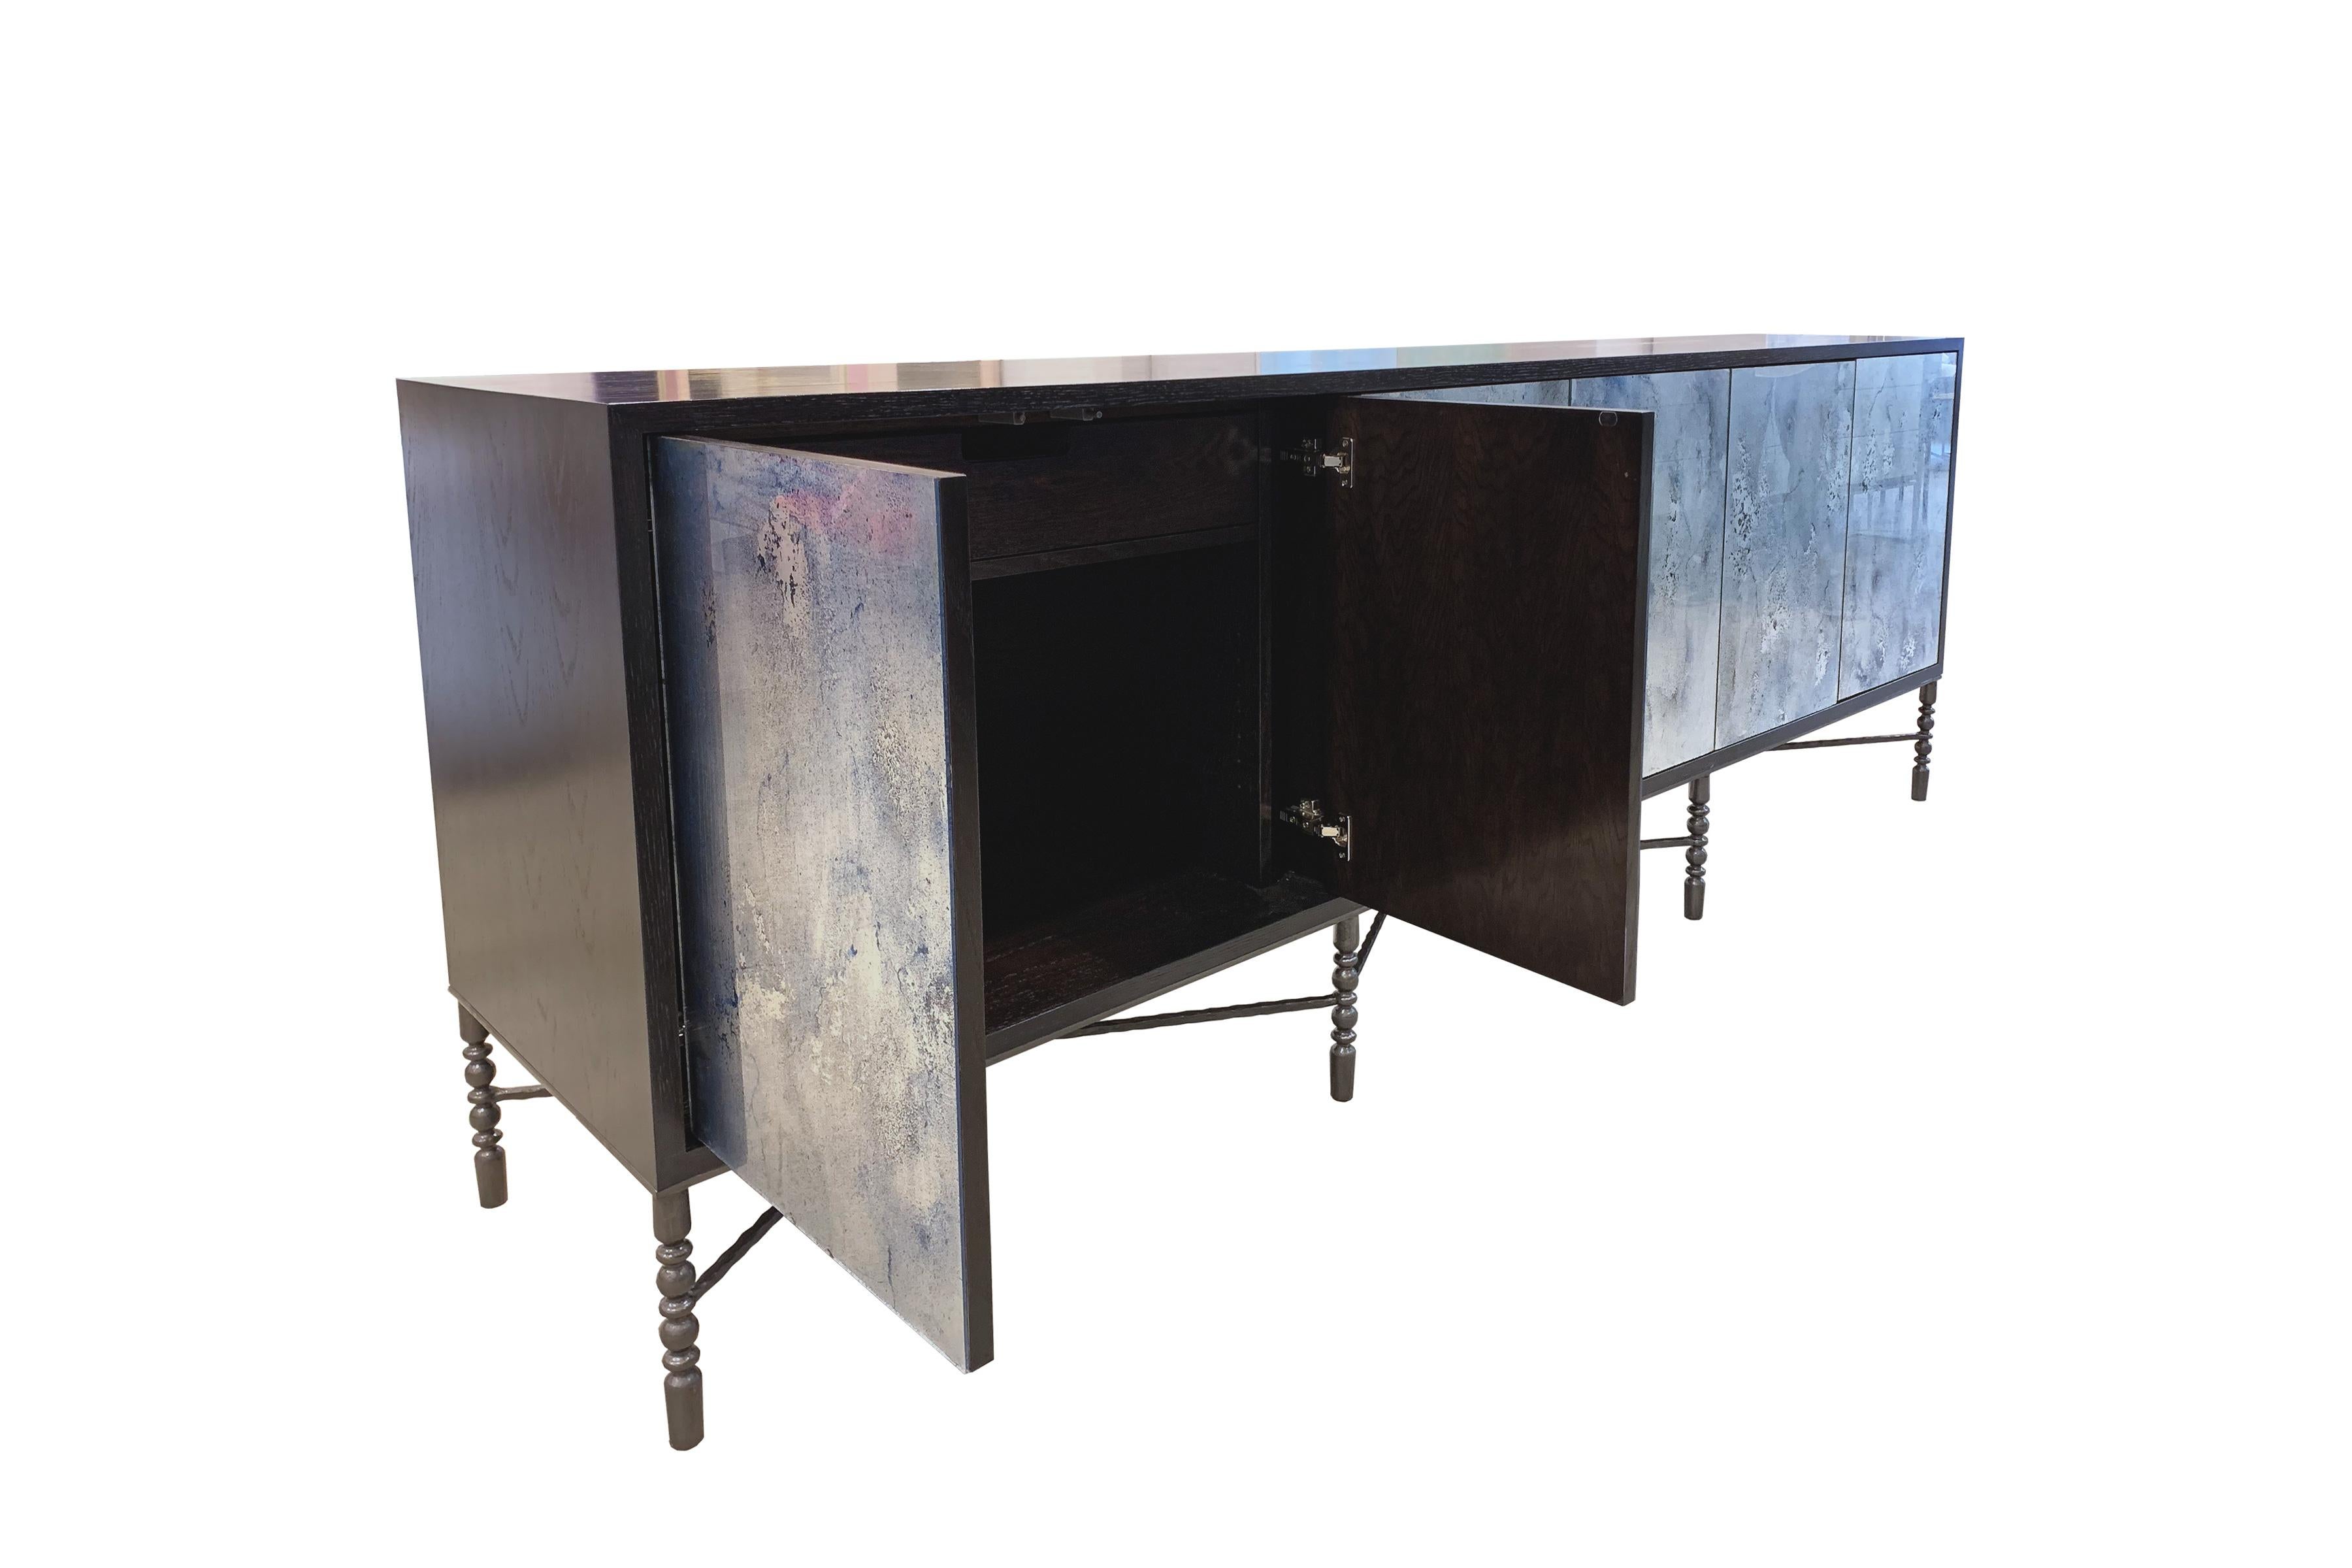 The Mystic buffet or credenza by Ercole home has a 6-door front, with Espresso wood finish on oak.
Hand-painted glass panels in Midnight Moon are on the door surface.
The decorative vintage style base with hand-hammered X-shape stretchers in